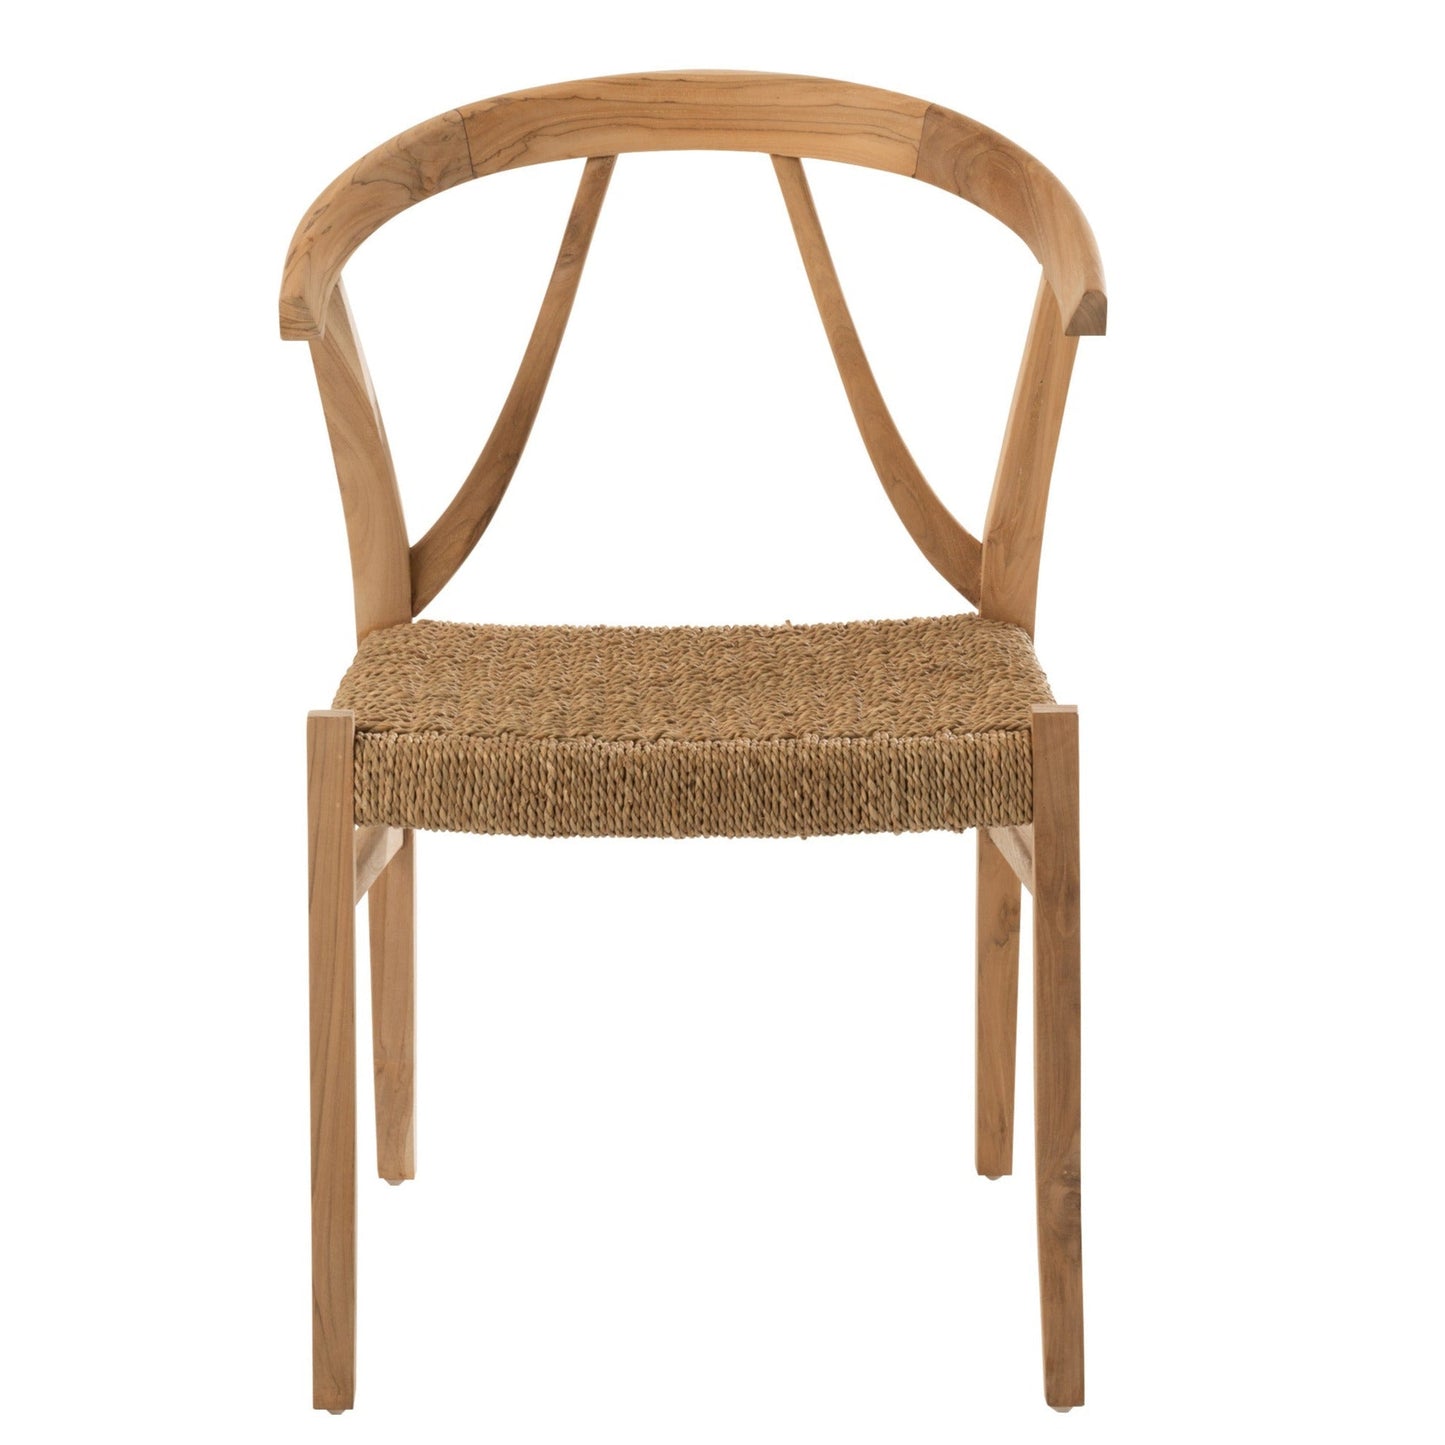 Nature Wood Chair